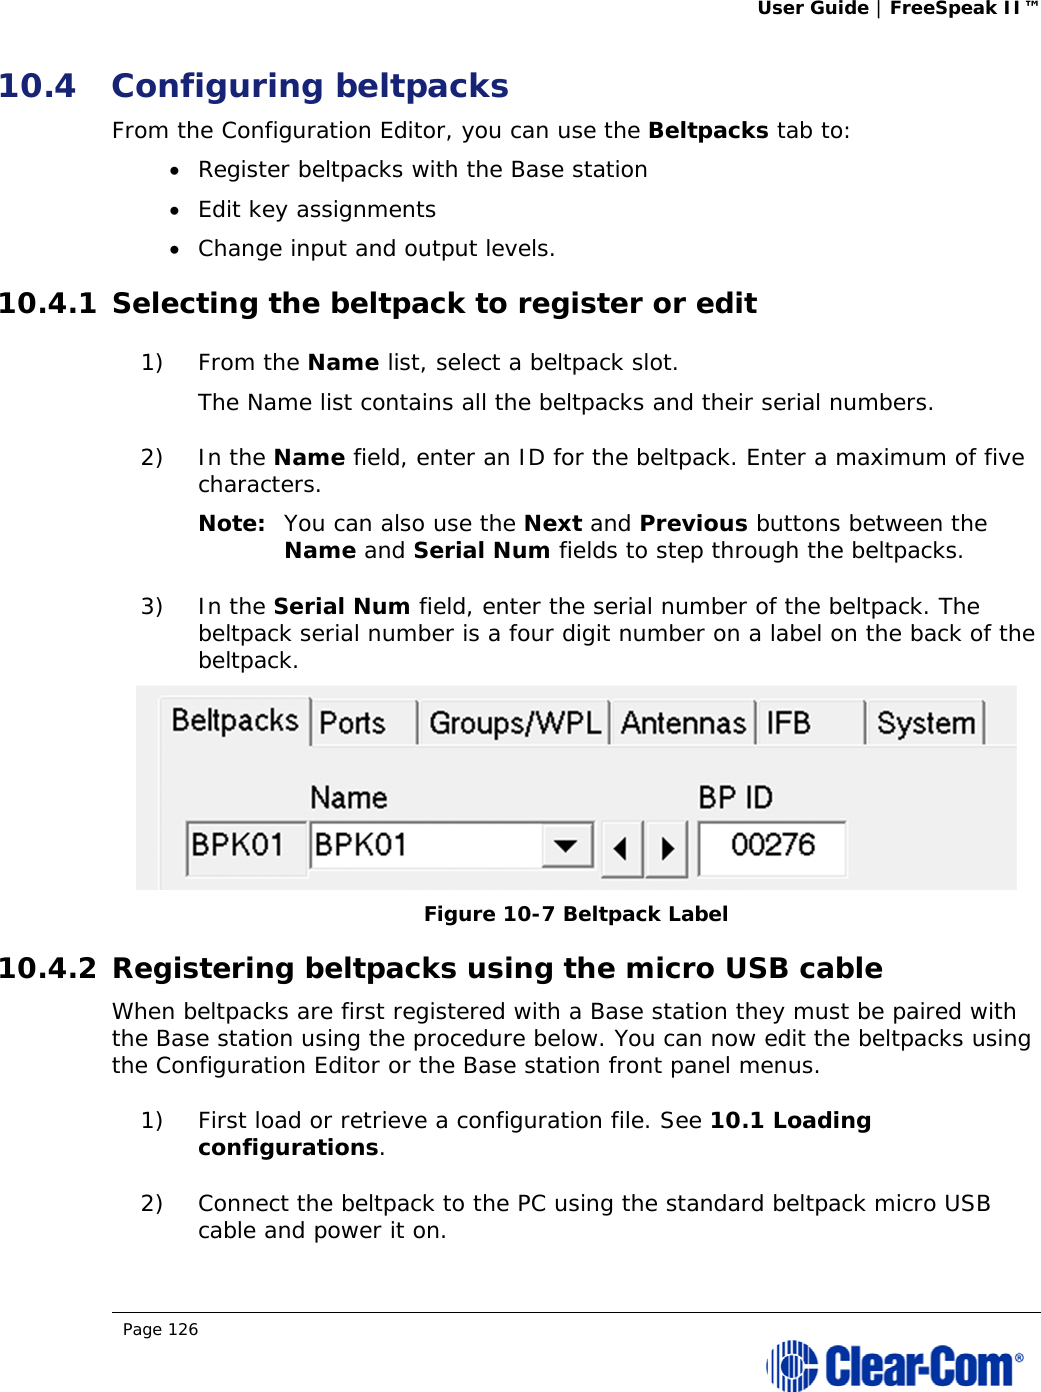 User Guide | FreeSpeak II™  Page 126  10.4 Configuring beltpacks From the Configuration Editor, you can use the Beltpacks tab to:  Register beltpacks with the Base station  Edit key assignments   Change input and output levels. 10.4.1 Selecting the beltpack to register or edit 1) From the Name list, select a beltpack slot.  The Name list contains all the beltpacks and their serial numbers.  2) In the Name field, enter an ID for the beltpack. Enter a maximum of five characters. Note: You can also use the Next and Previous buttons between the Name and Serial Num fields to step through the beltpacks. 3) In the Serial Num field, enter the serial number of the beltpack. The beltpack serial number is a four digit number on a label on the back of the beltpack.  Figure 10-7 Beltpack Label 10.4.2 Registering beltpacks using the micro USB cable When beltpacks are first registered with a Base station they must be paired with the Base station using the procedure below. You can now edit the beltpacks using the Configuration Editor or the Base station front panel menus. 1) First load or retrieve a configuration file. See 10.1 Loading configurations. 2) Connect the beltpack to the PC using the standard beltpack micro USB cable and power it on. 